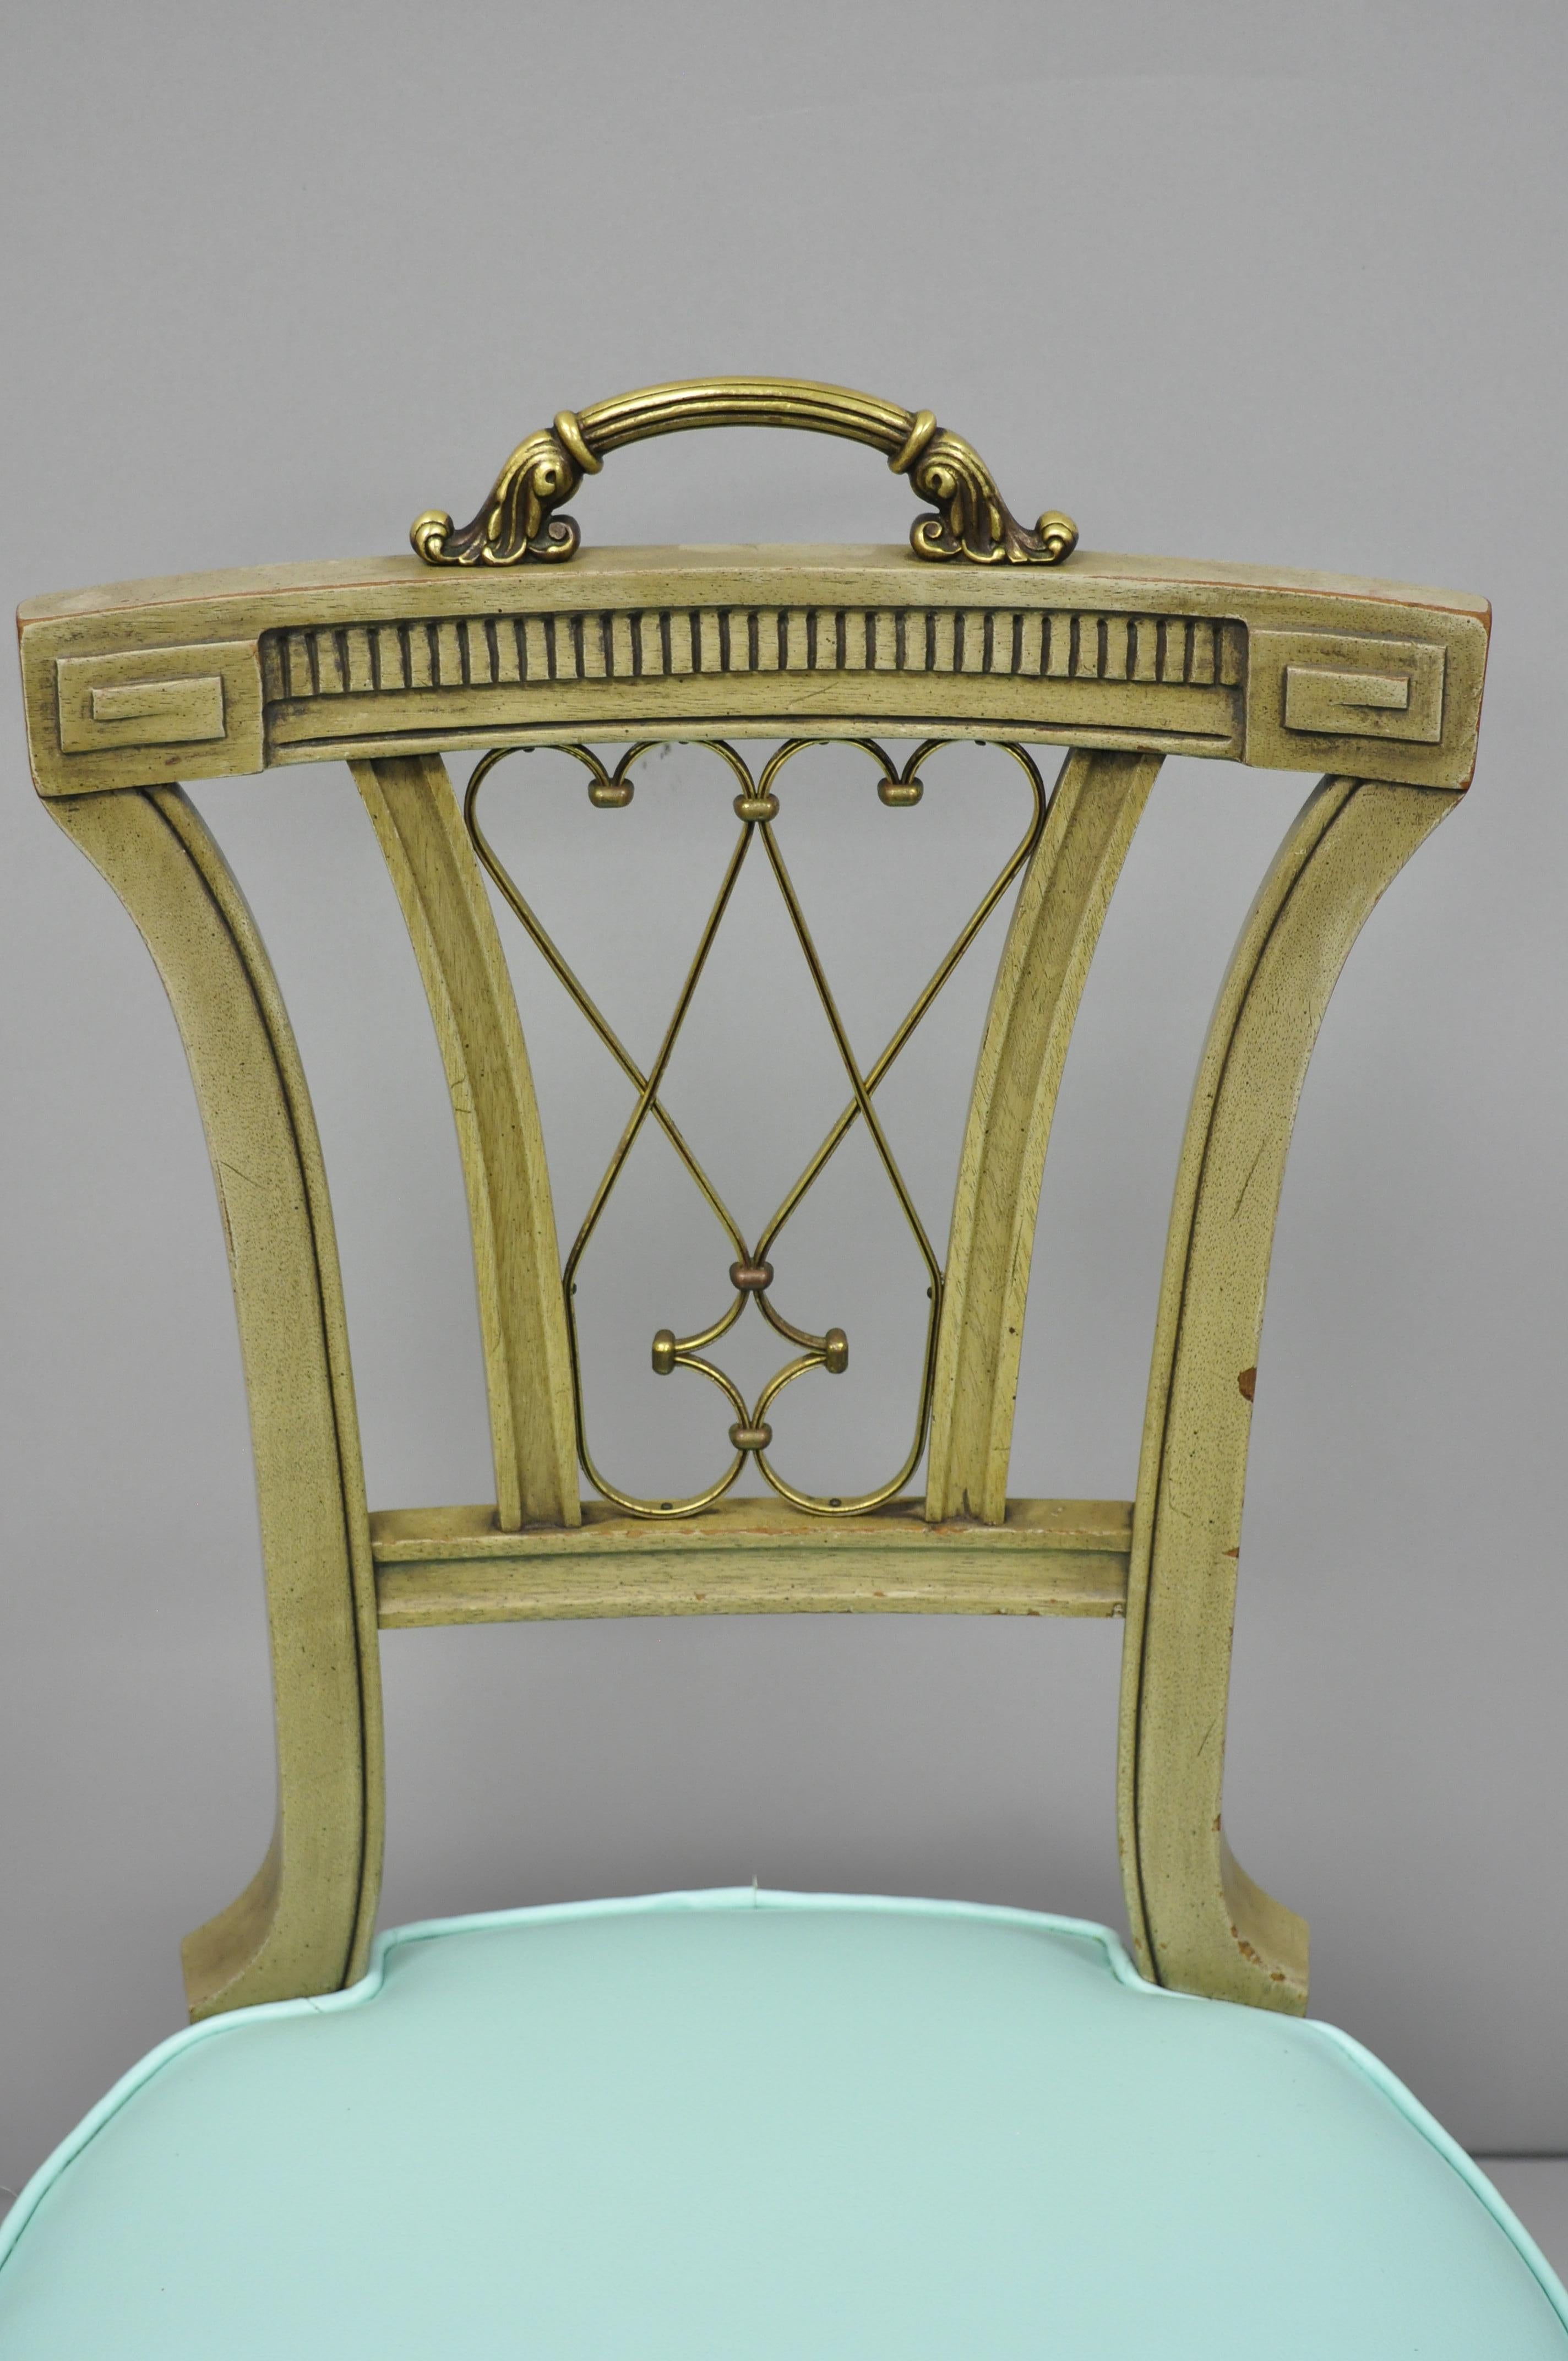 Mid-20th Century Carved Mahogany French Regency Style Chairs with Brass Handle & Aqua Vinyl, Pair For Sale